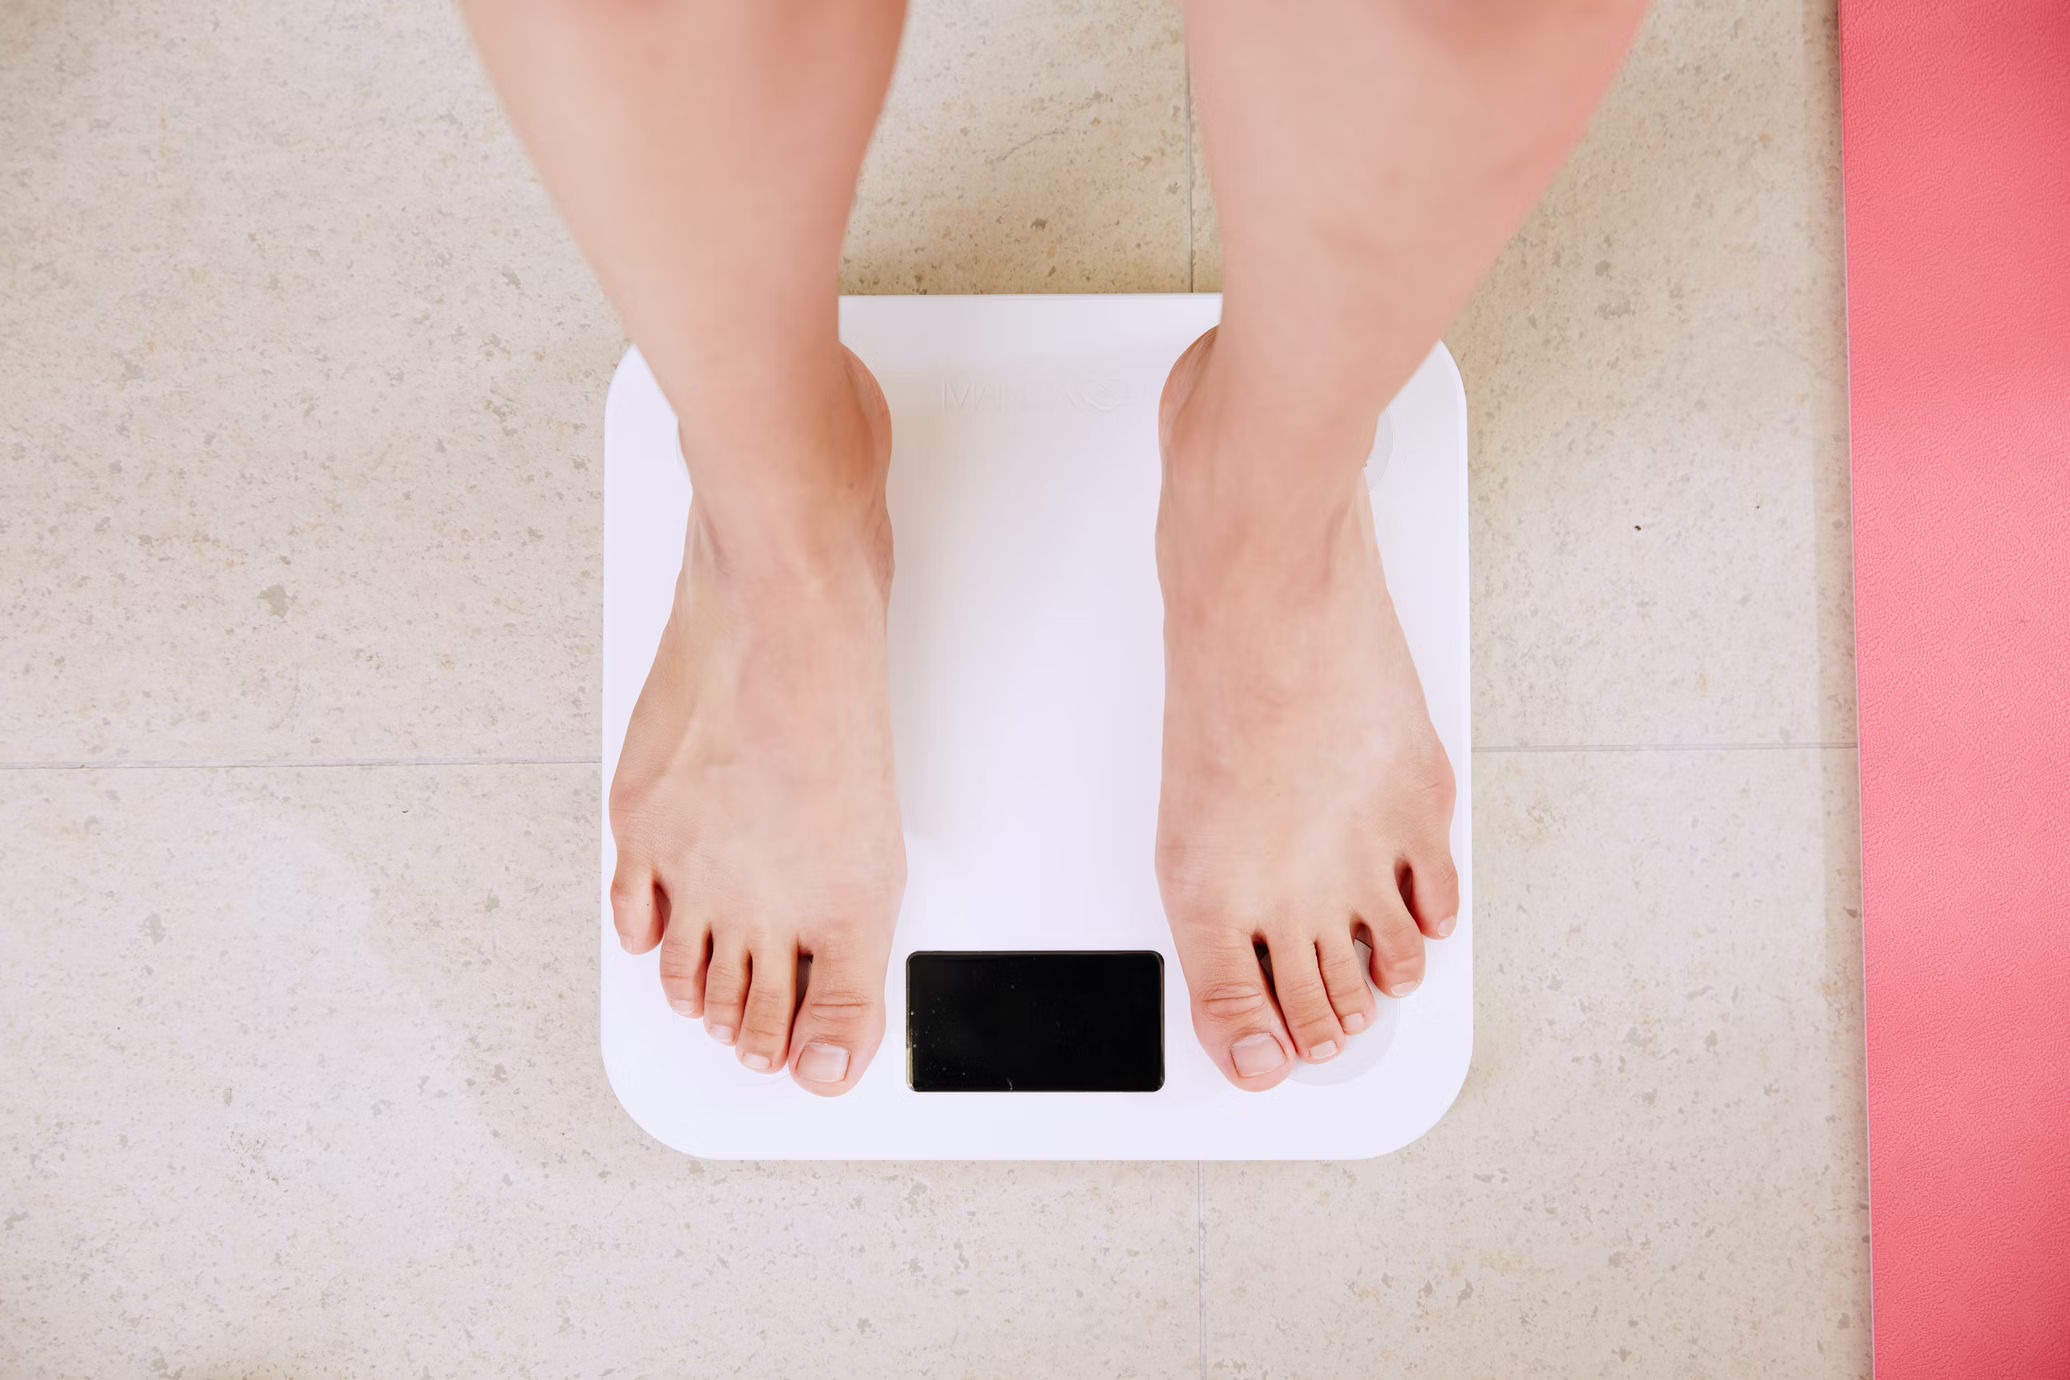 High BMI in adolescents linked to risk of severe COVID: Study